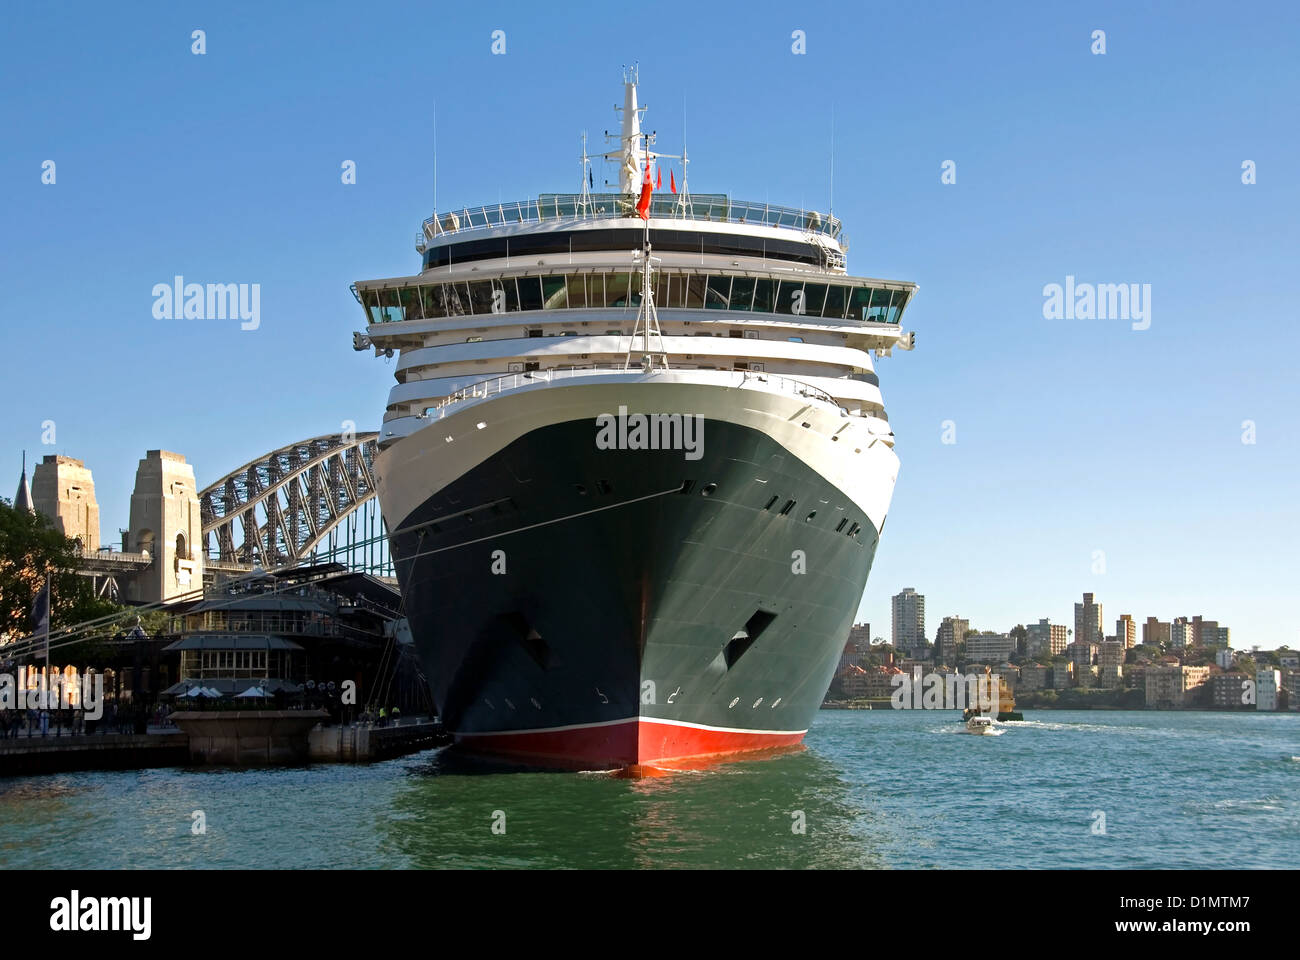 A luxury cruise ship berthed in Sydney Harbour, Australia Stock Photo